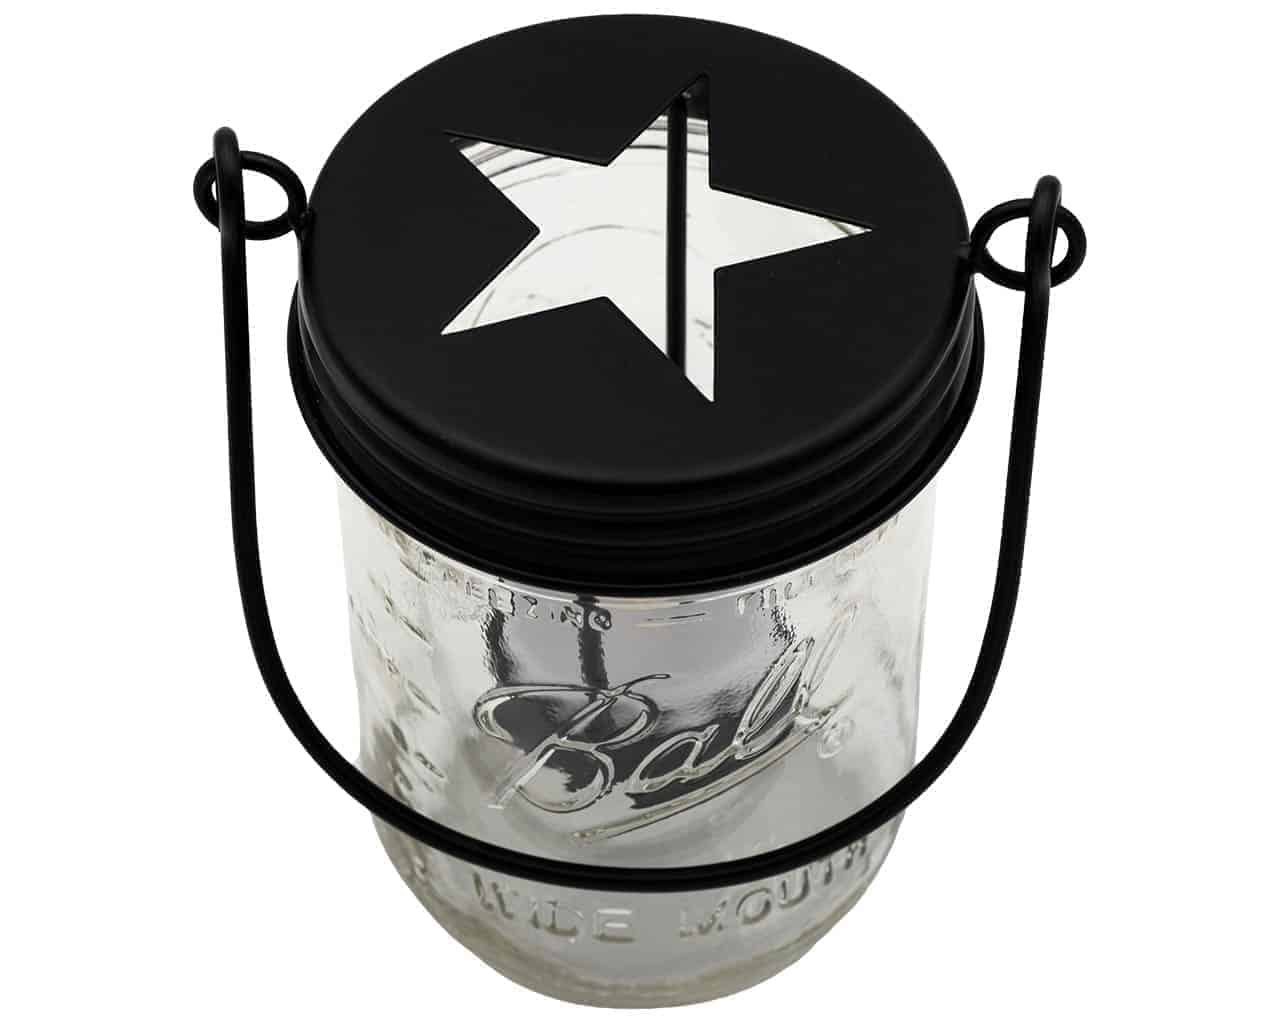 Black Star Cutout Tea Light Candle Holder Lids With Handles for Mason Jars 3 Pack